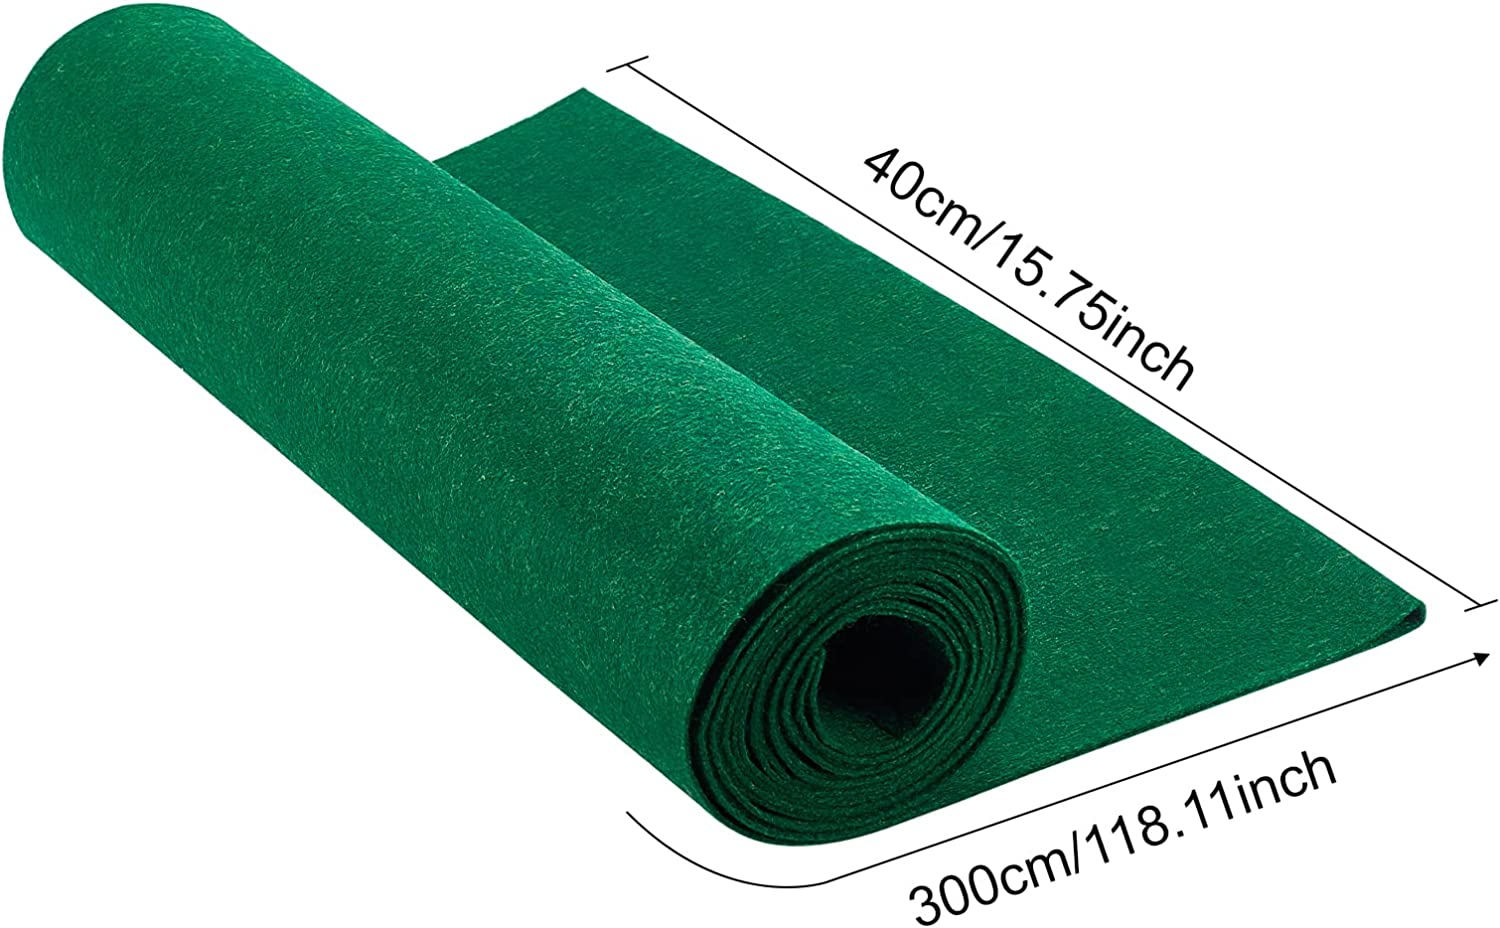 10FT 15.75 Inch Wide Green Felt Fabric Sheet St Patrick's Day Nonwoven Felt  Roll Padding Felt Fabric for Cushion DIY Craft Patchwork Sewing 0.9mm Thick  